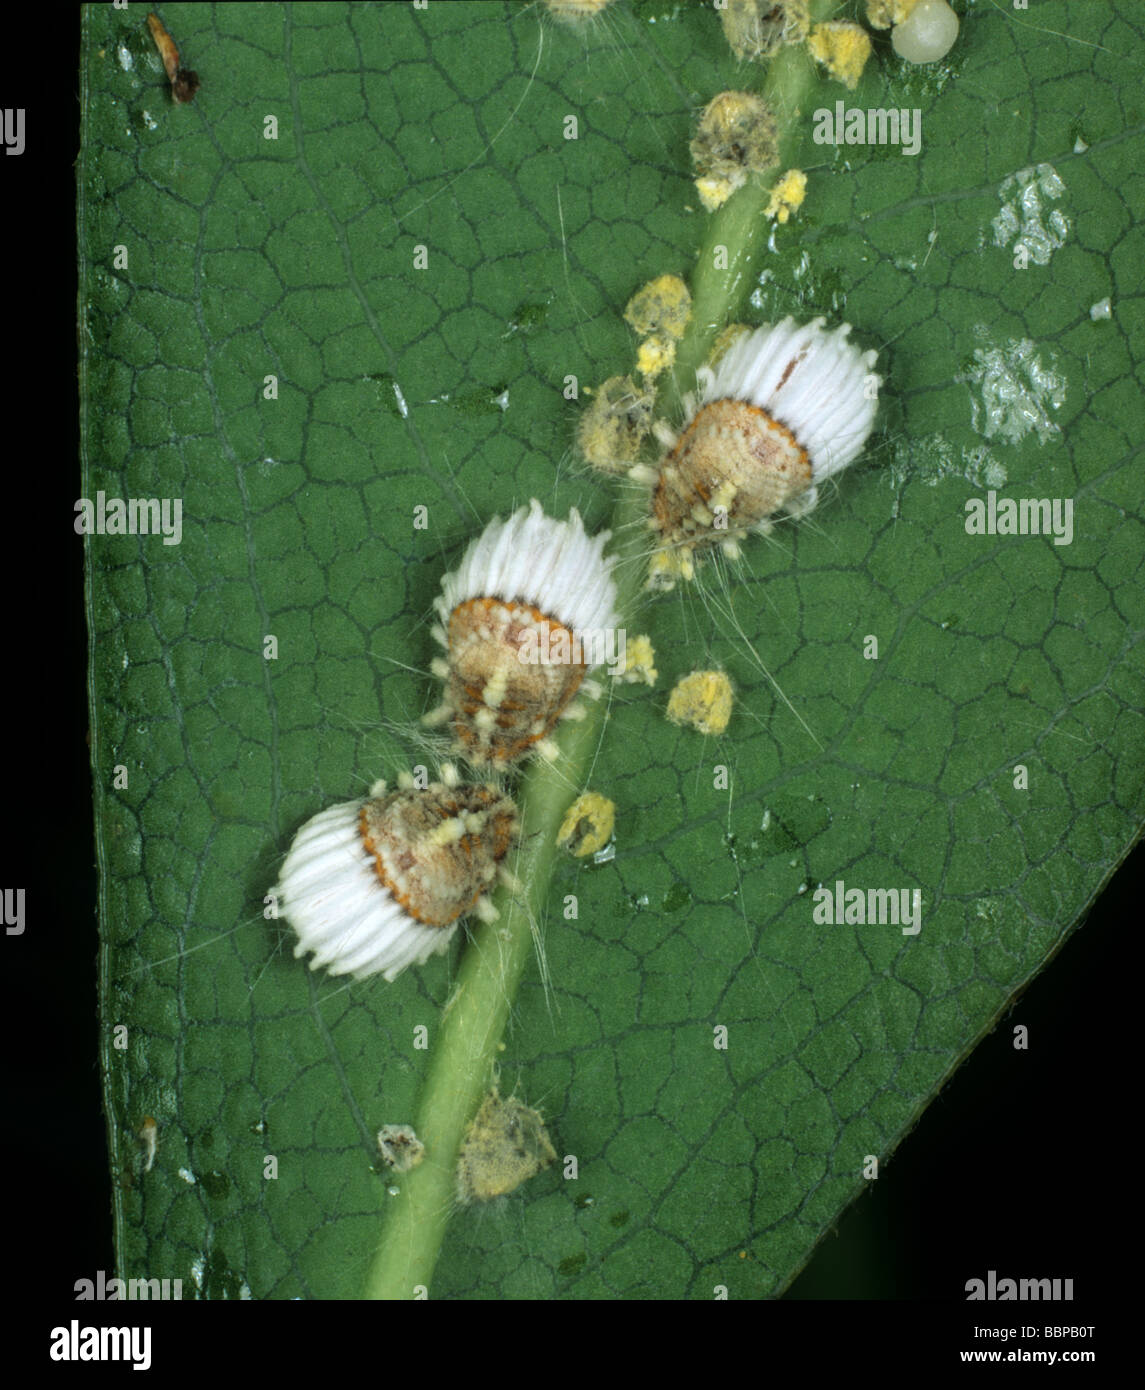 Cottony cushion scale Icerya purchasi adults and juveniles on a citrus leaf Stock Photo